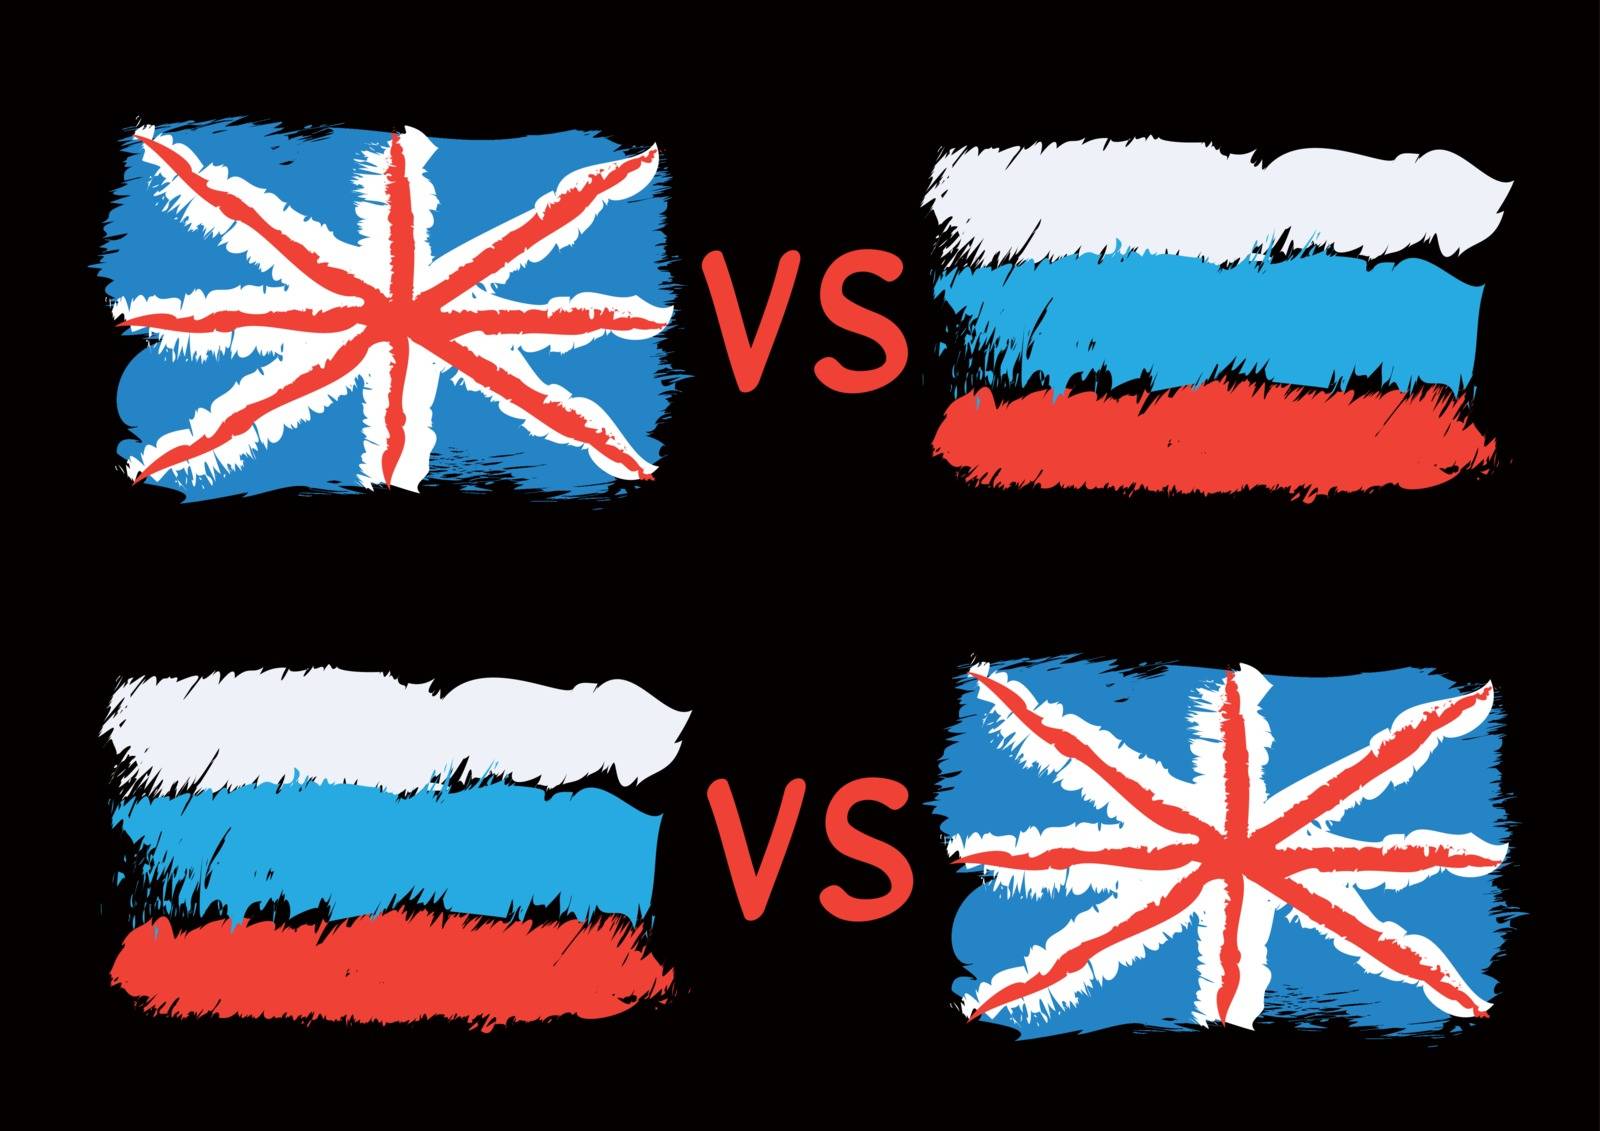 conflict between Great Britain and Russia by romvo